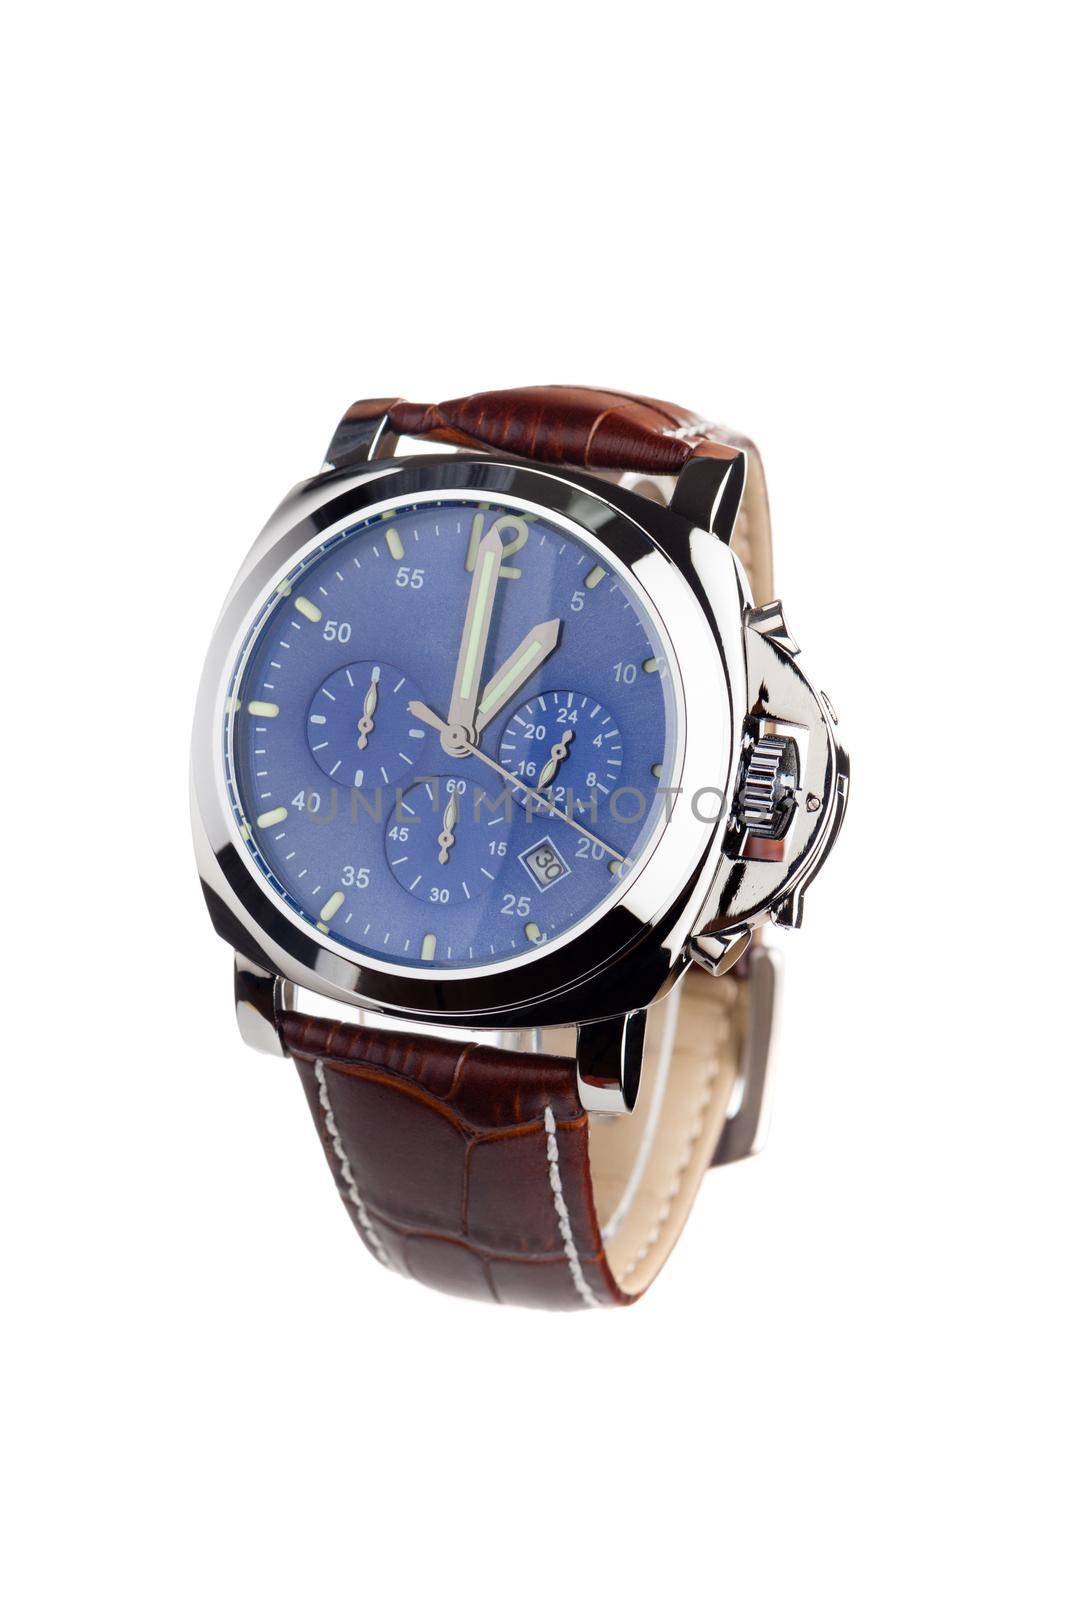 luxury fashion watch with blue dial and brown crocodile grain leather watch band on white background